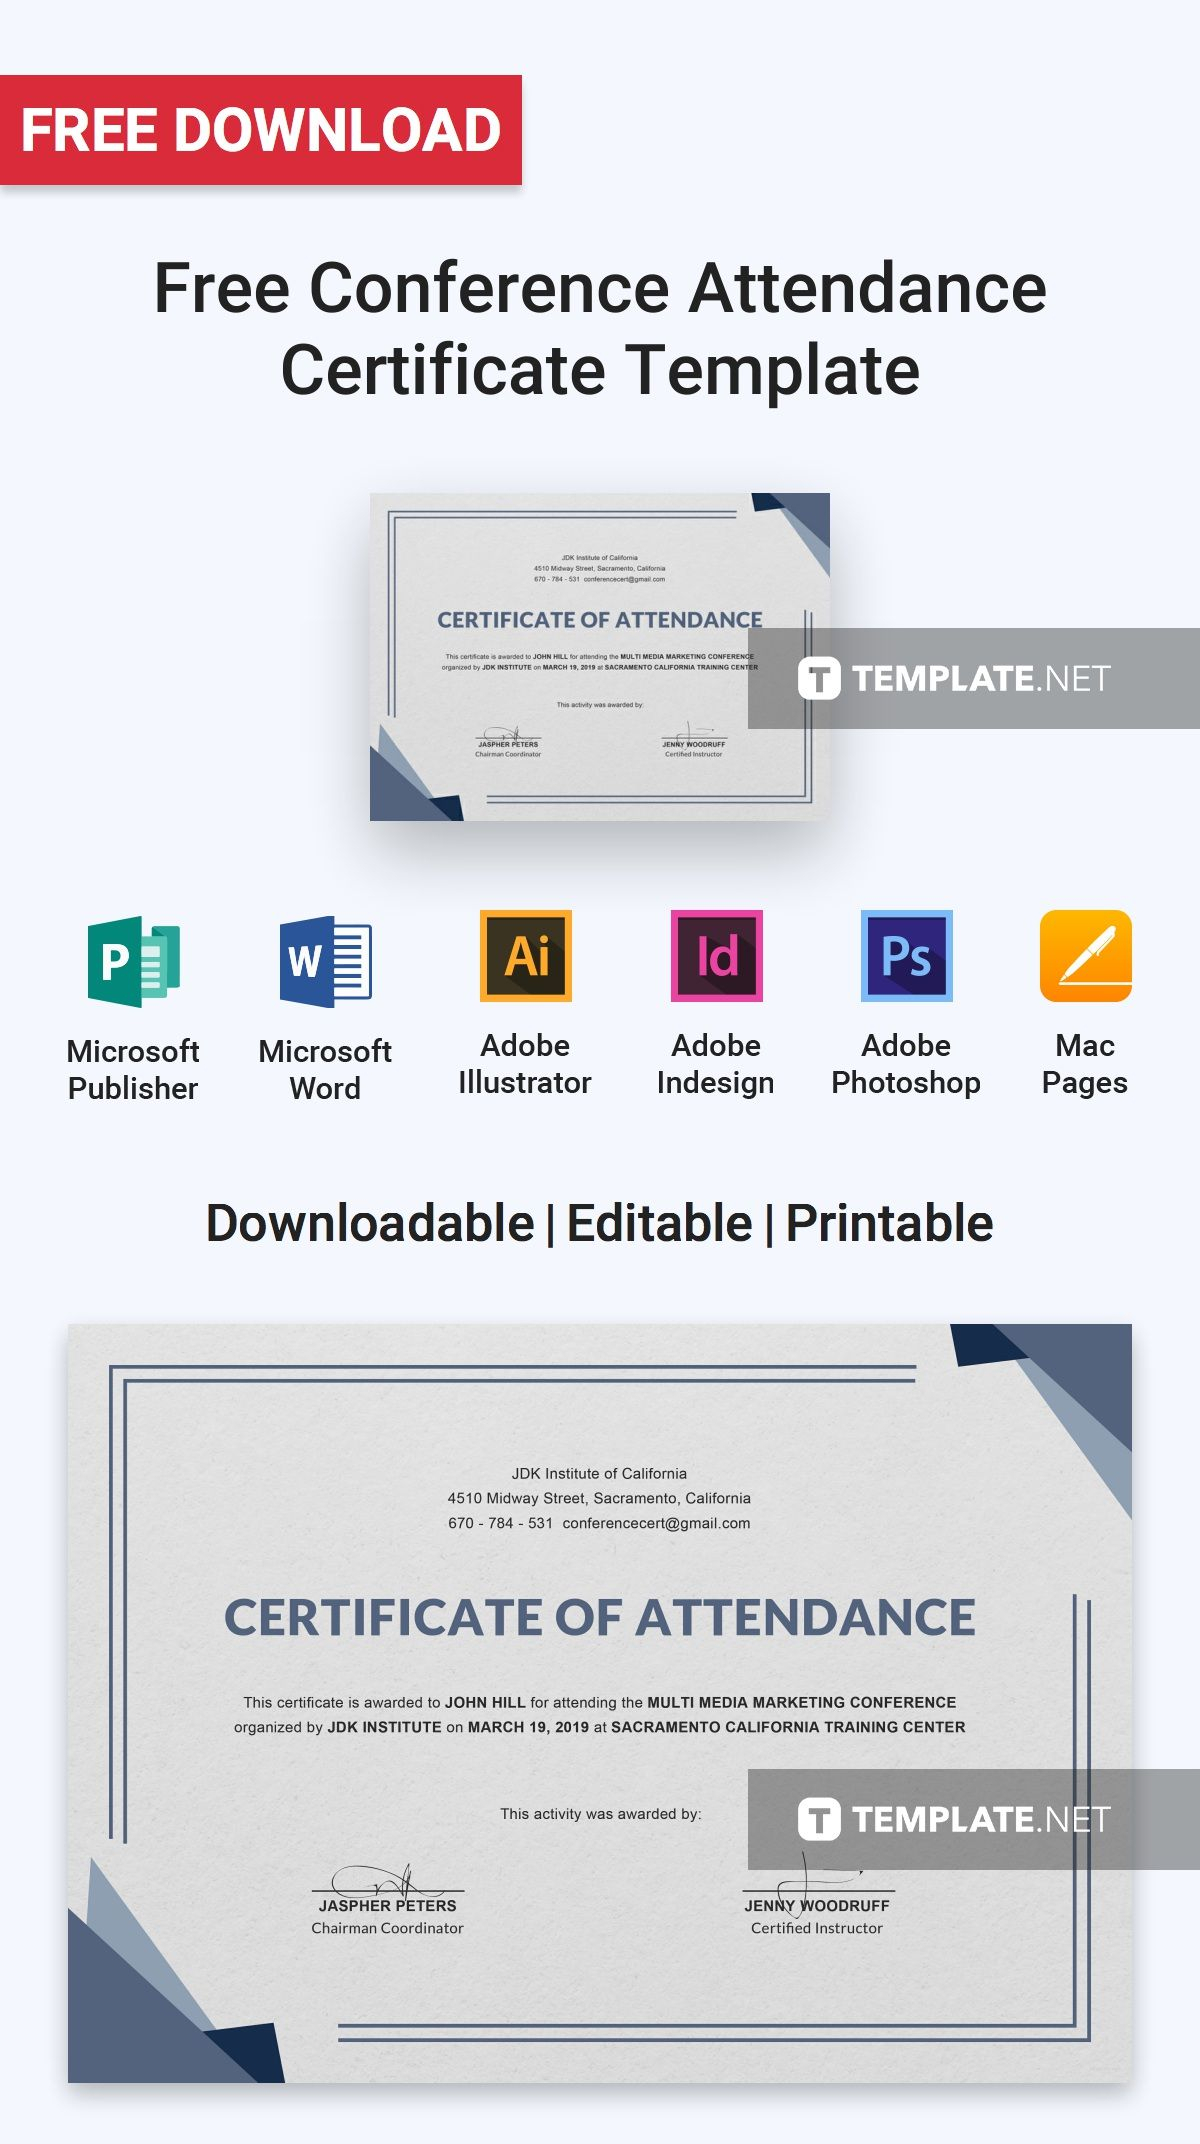 Free Conference Attendance Certificate | Certificate Throughout Conference Participation Certificate Template